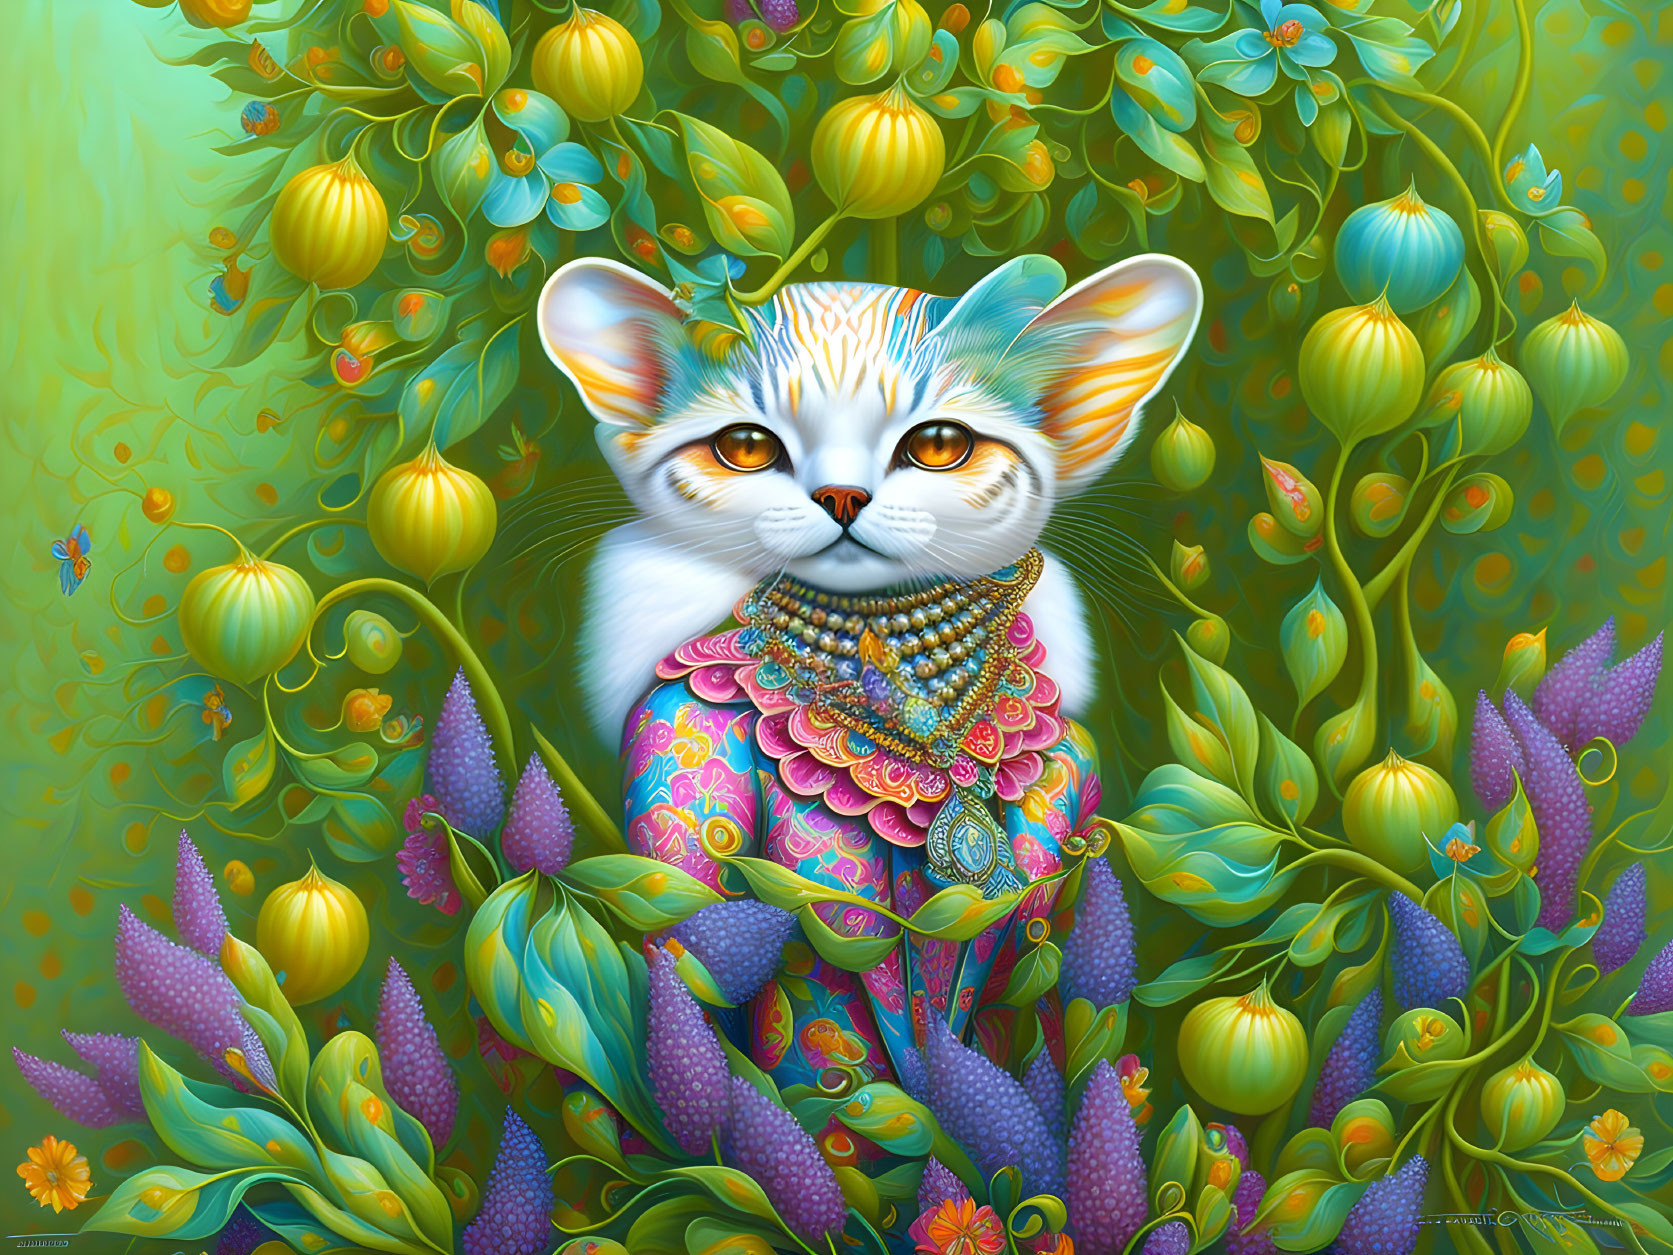 Vibrant illustration of stylized cat with intricate patterns and jewelry